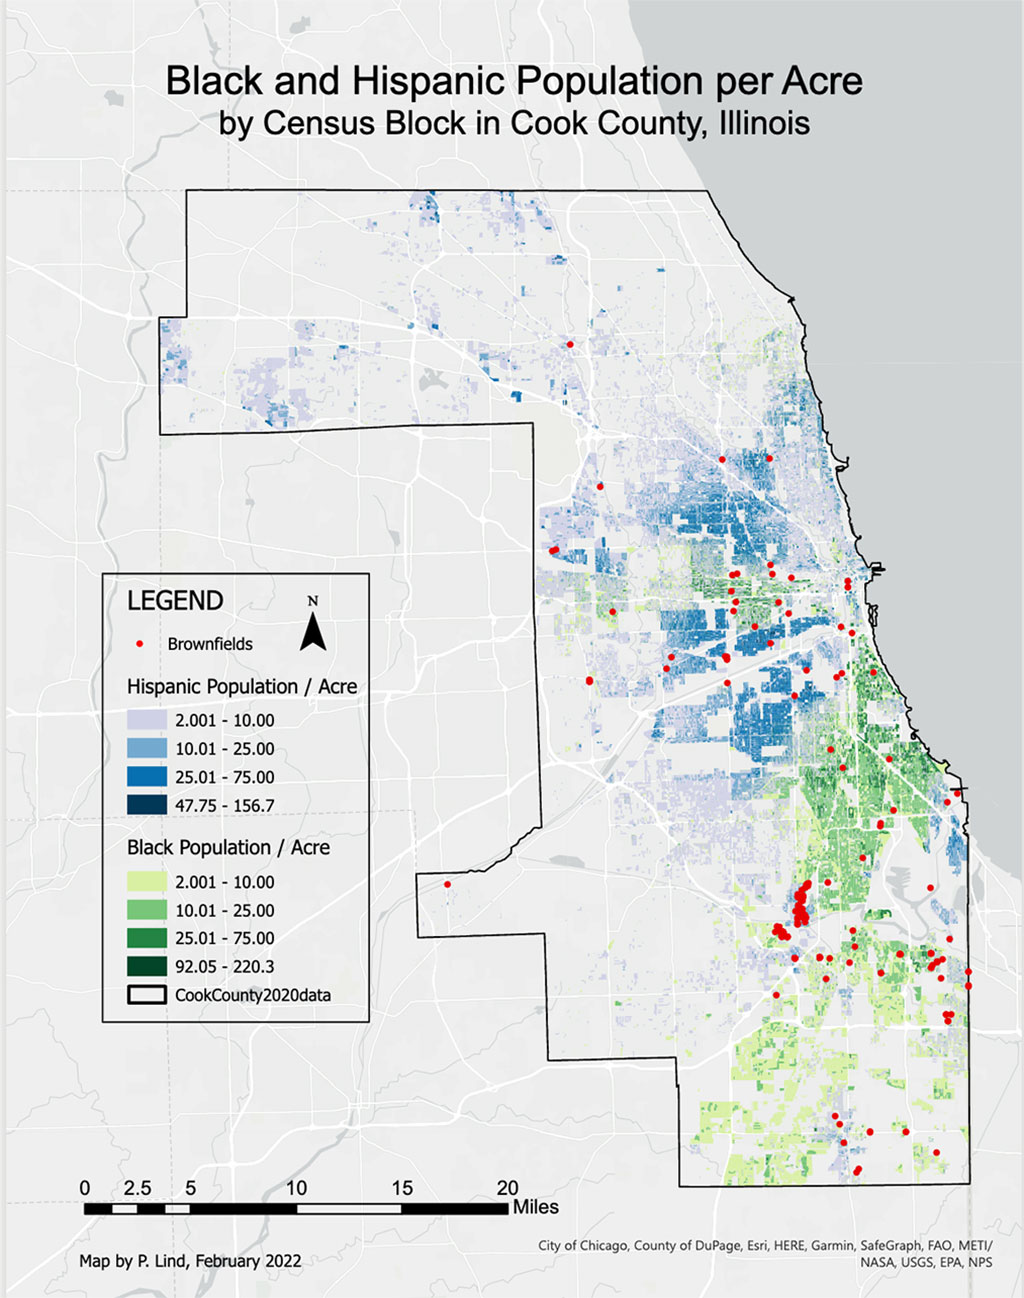 Phoebe Lind's map showing Black and Latino population locations in Cook County, Illinois